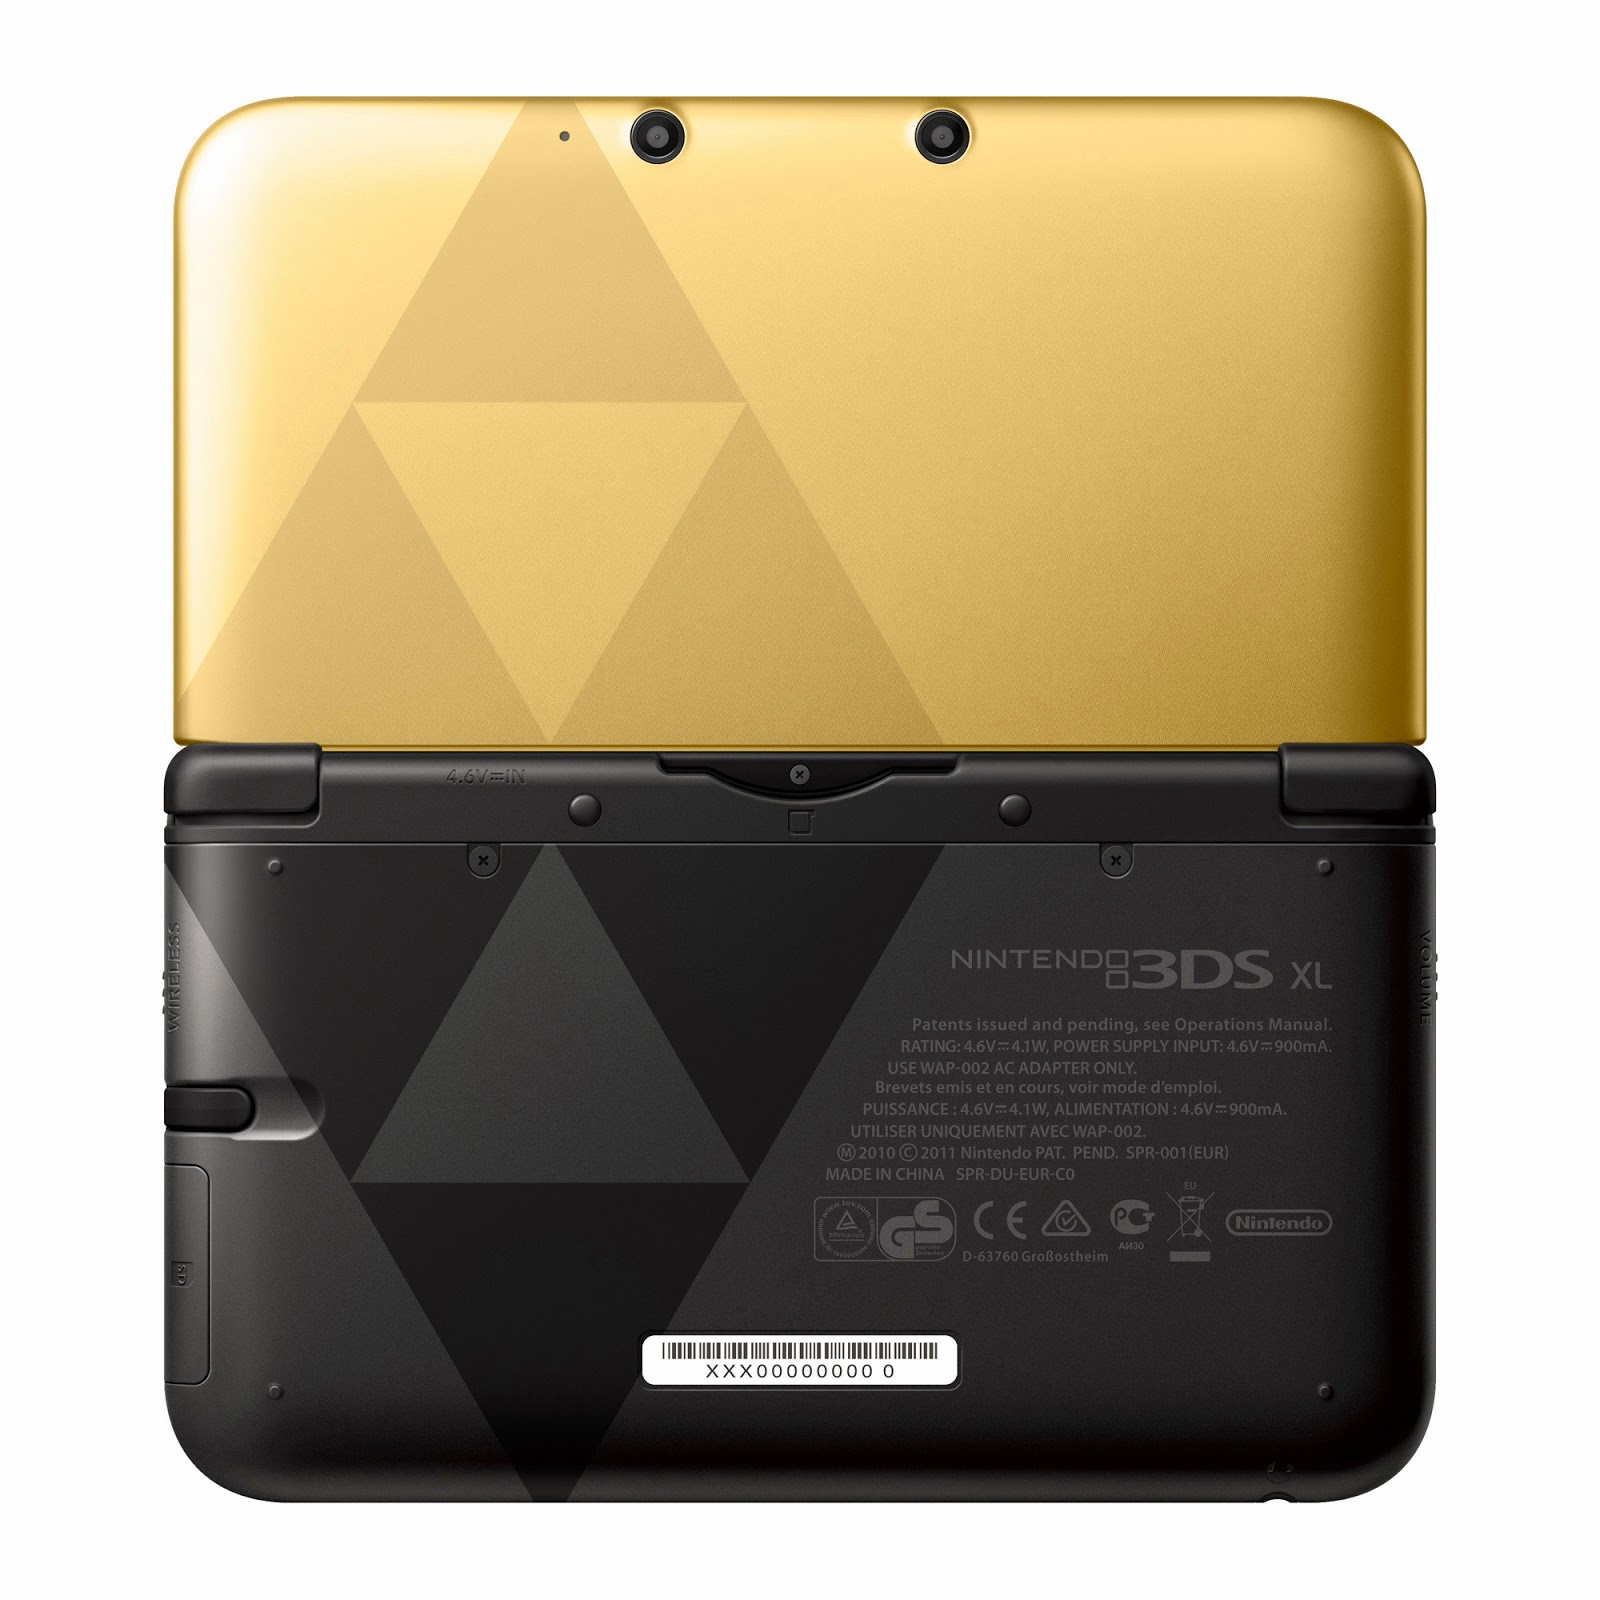 Aonuma Explains Why The 3DS Wasn't Used As The Tingle Tuner In